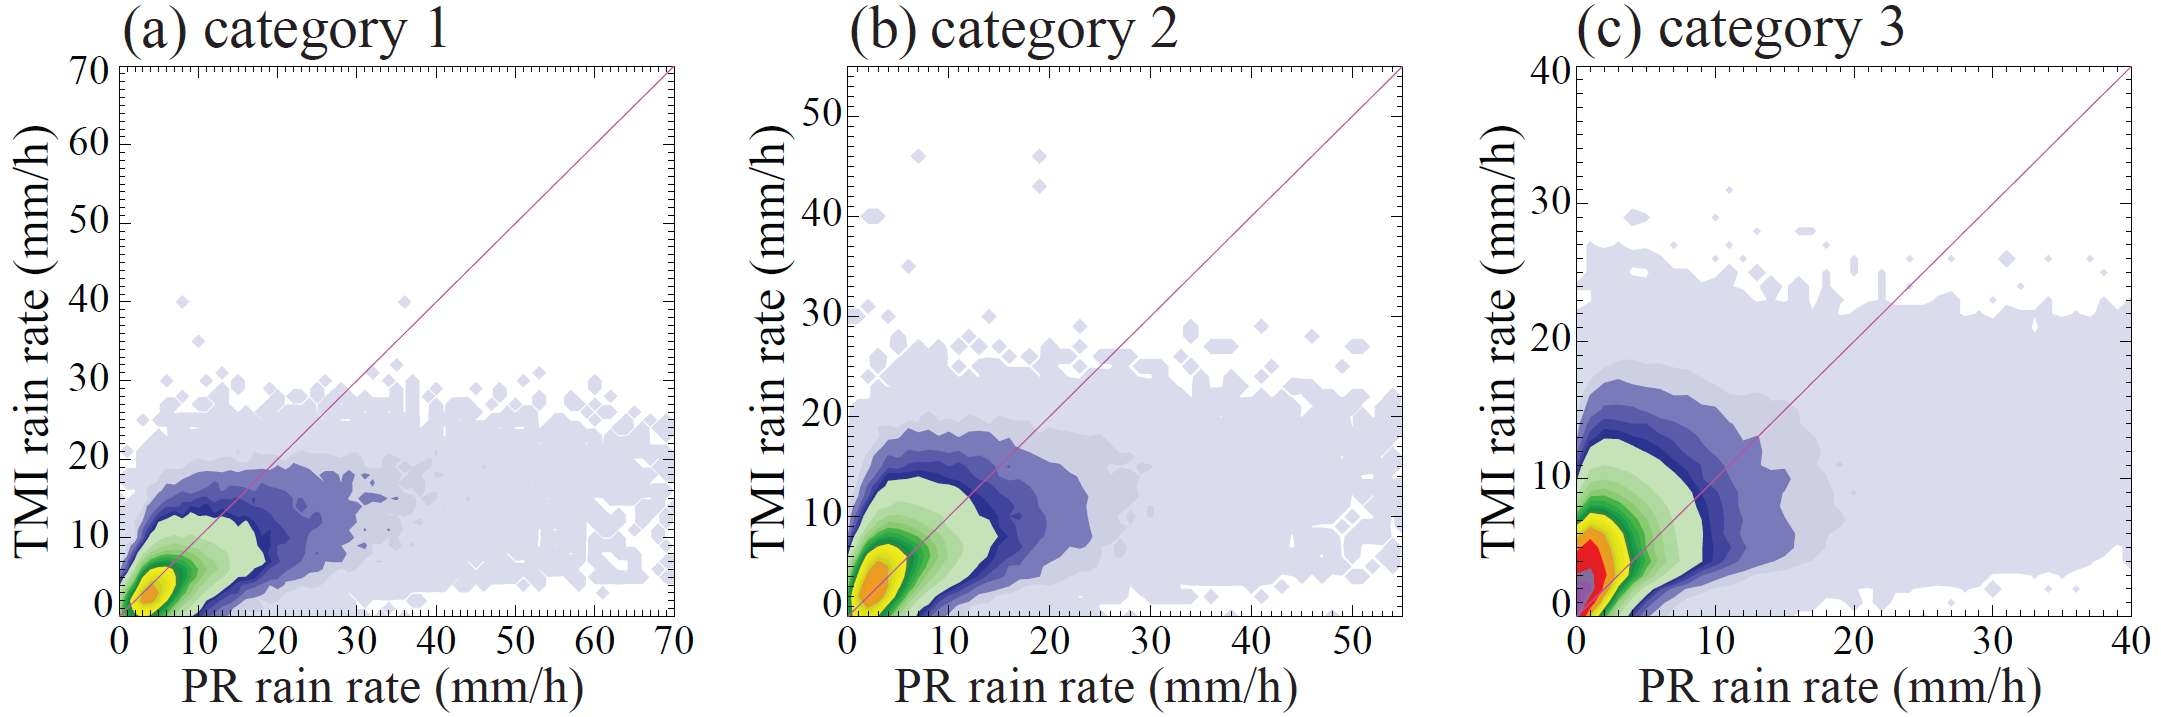 Figure 19. Occurrence frequency (%) of rain pixels in each 1 mm h-1 TMIand PR-derived rain rate bin at the intervals of 0.0001, 0.01, 0.02, 0.04, 0.06, 0.08, 0.1, 0.2, 0.3, 0.4, 0.5, 0.6, 0.7, 0.8, 0.9, 1.0, 1.2, 1.4, 1.6, 1.8, 2.0, 2.2, 2.4, 2.6, 2.8, 3.0, 3.5, 4.0, 4.5, 5.0, 5.5, 6.0.